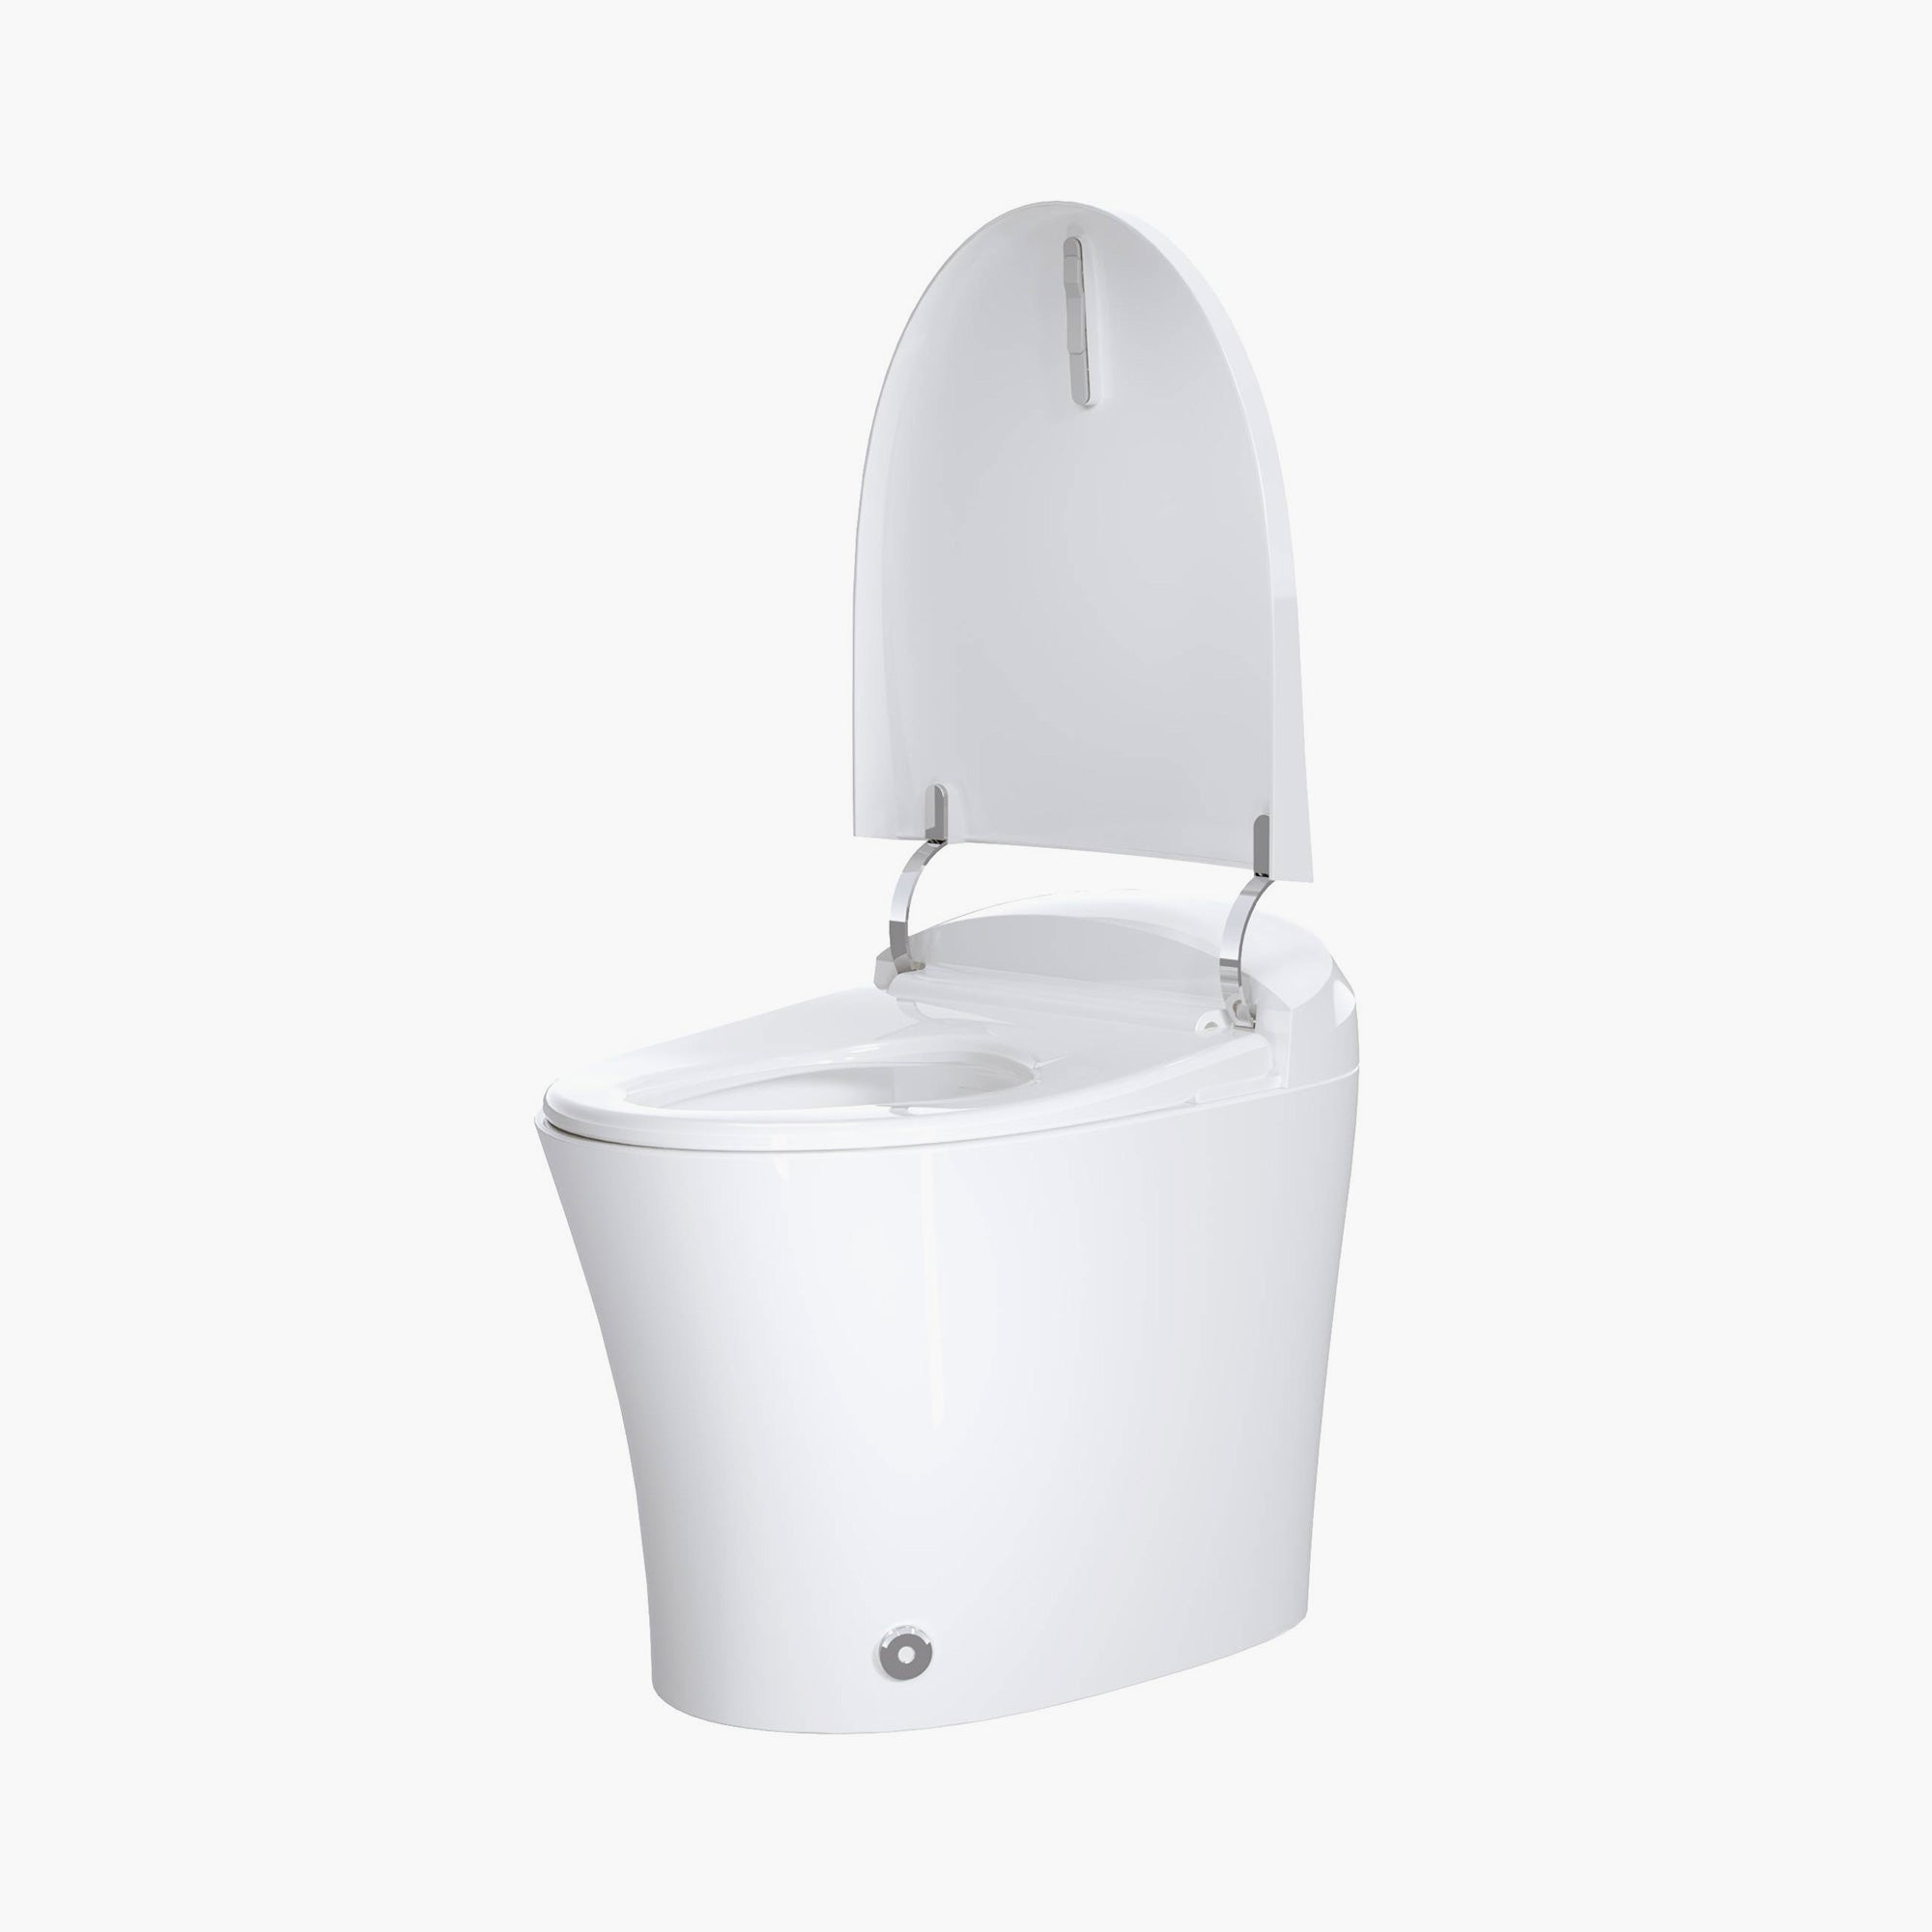 HOROW Best Toilet With Built In Bidet Compact Elongated Toilet Model T15